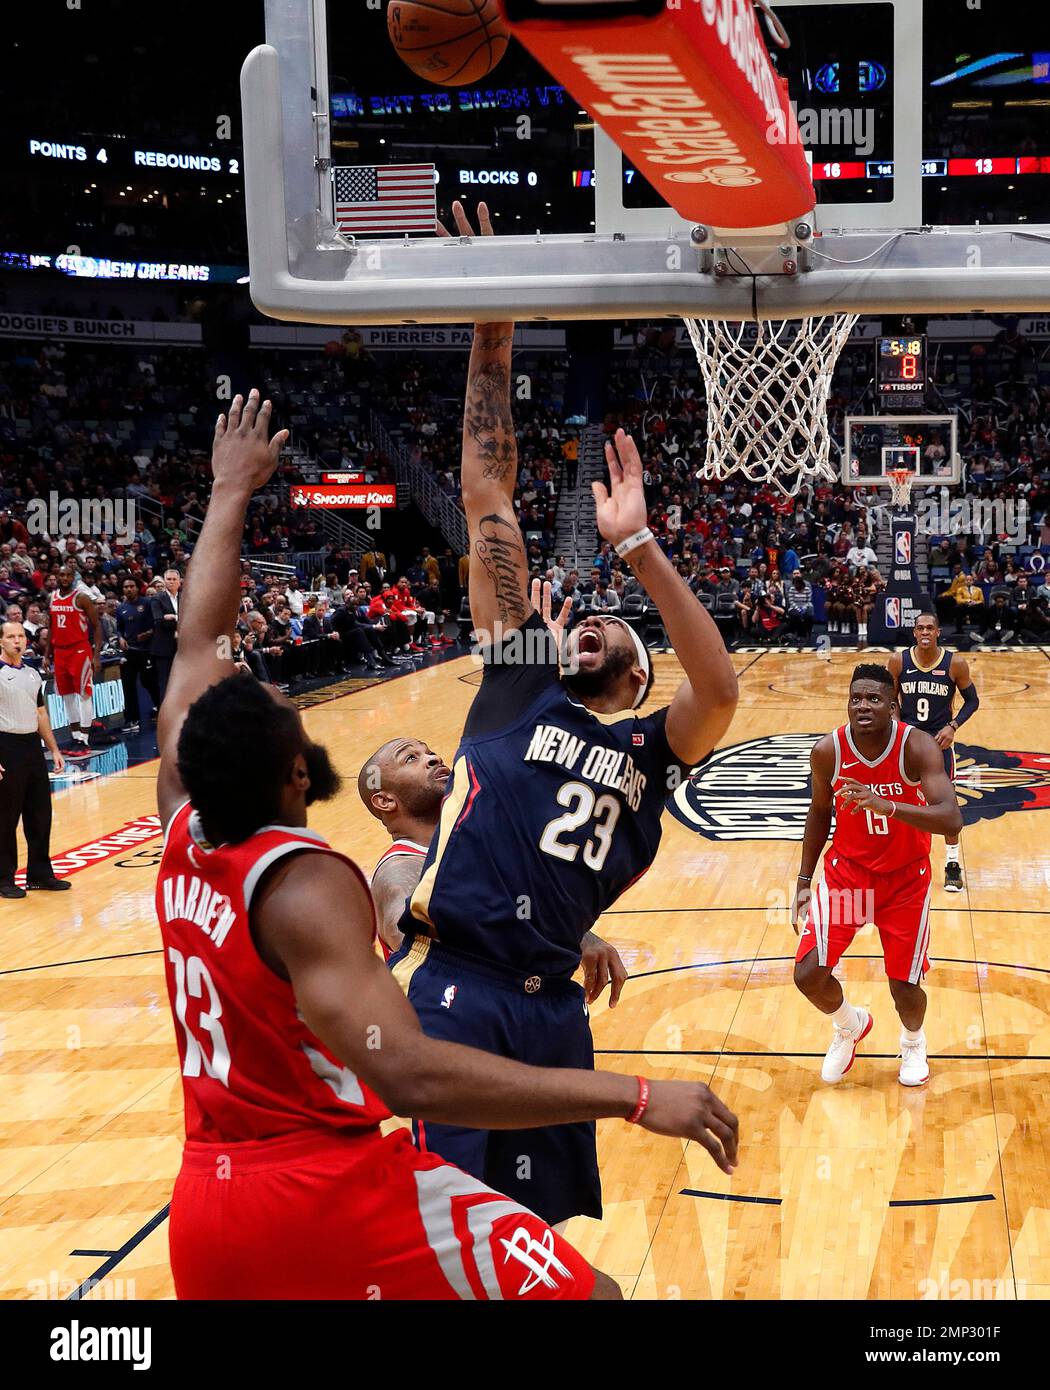 New Orleans Pelicans guard Ian Clark (23) goes to the basket against Houston Rockets guard James Harden (13) during the first half of an NBA basketball game in New Orleans, Friday, Jan. 26, 2018. (AP Photo/Gerald Herbert) Banque D'Images